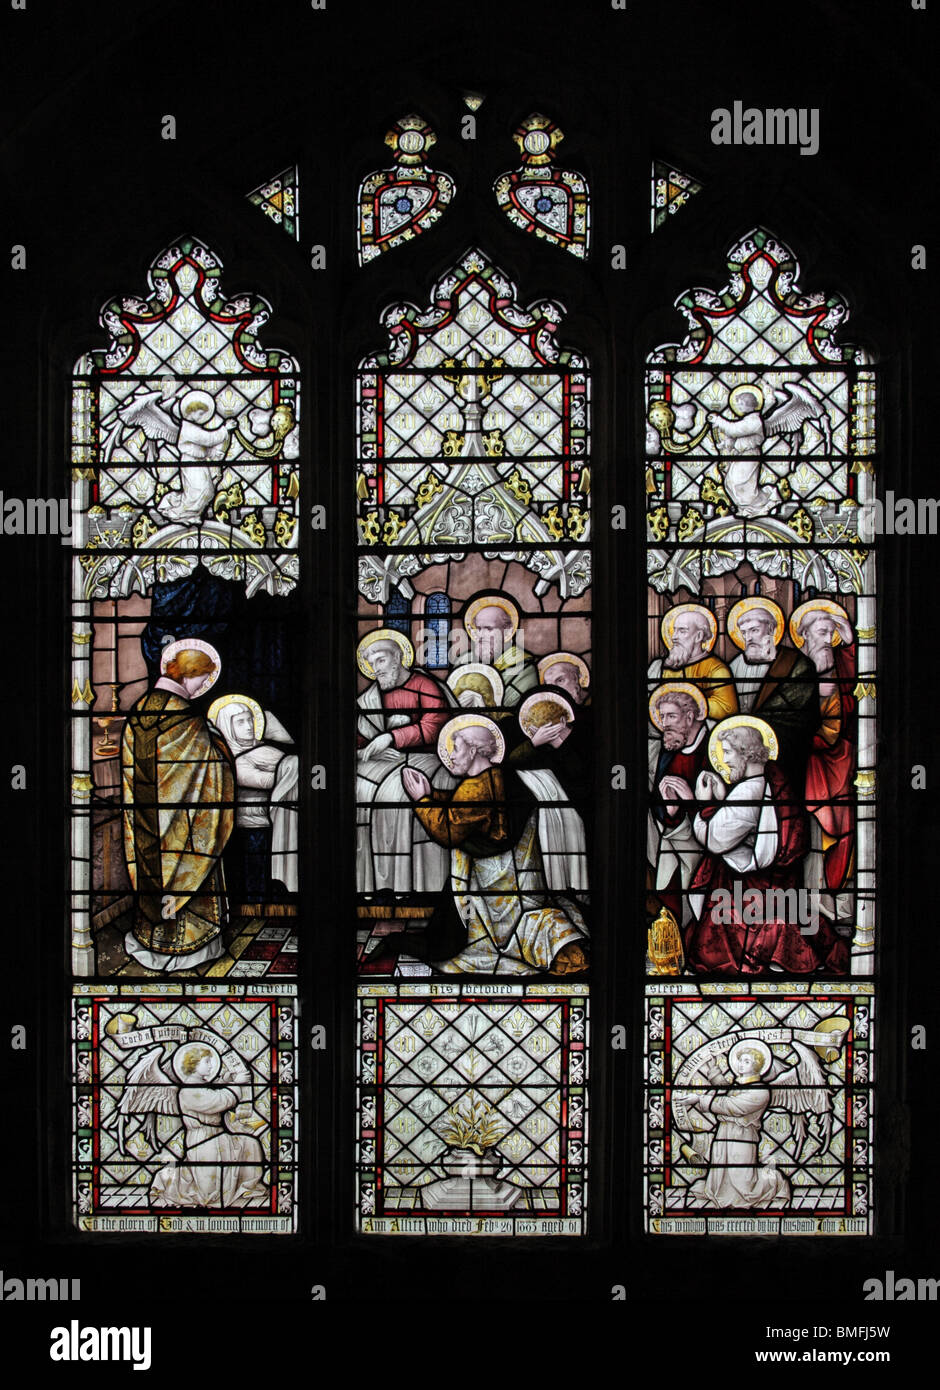 A stained glass window depicting the Dormition of St Mary. She lies on a bed surrounded by the twelve apostles, St Mary's Church Cropredy, Oxfordshire Stock Photo